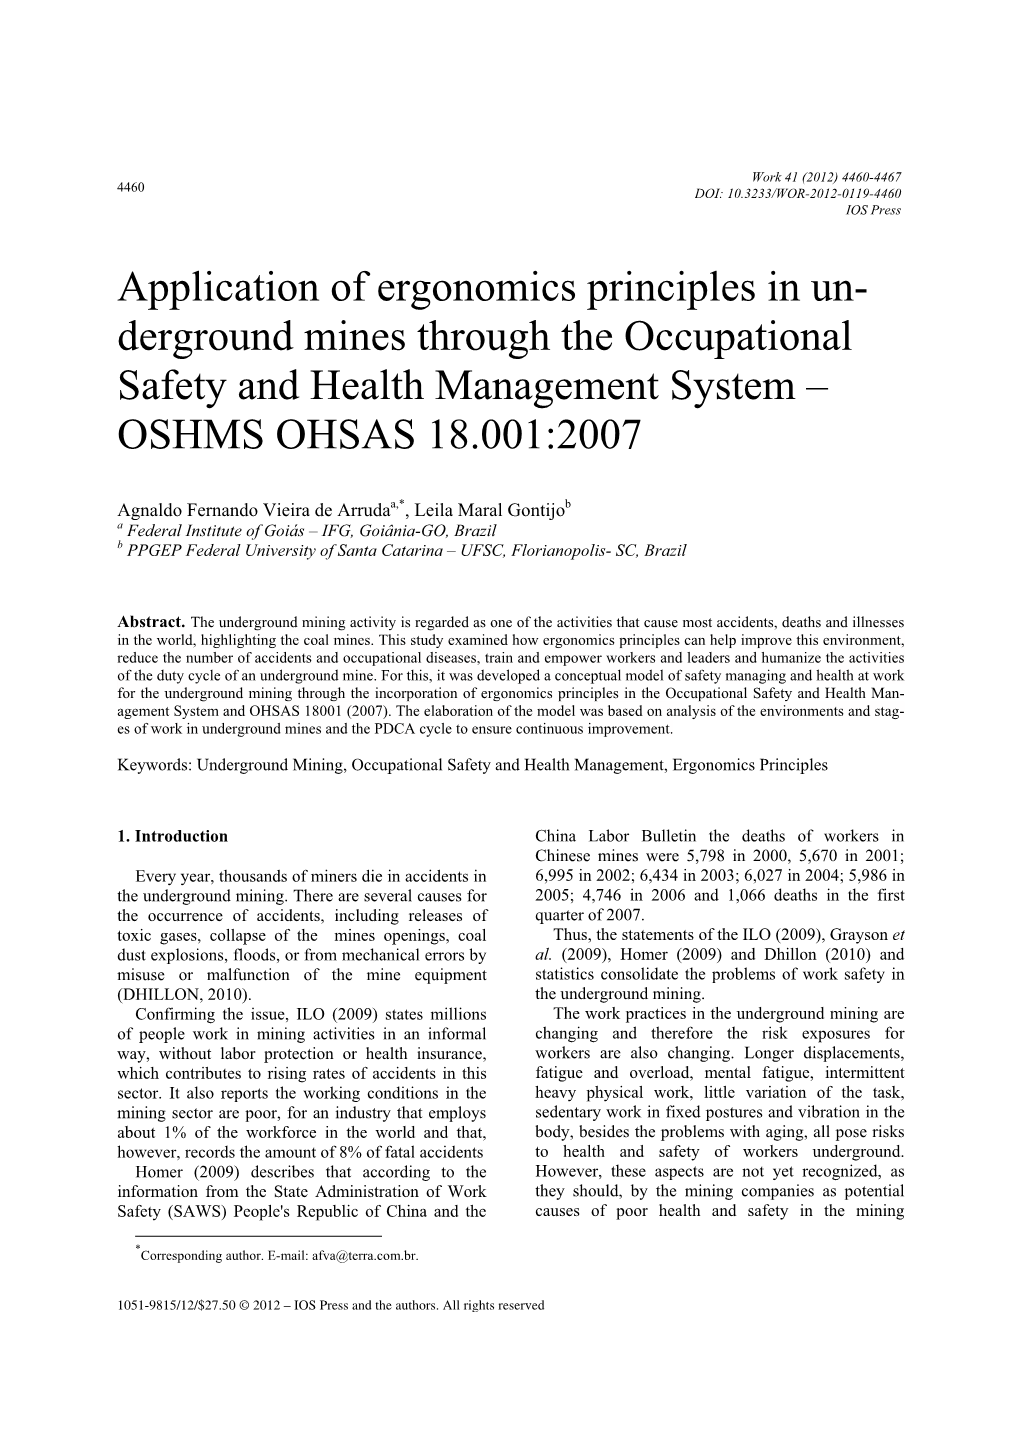 Application of Ergonomics Principles in Un- Derground Mines Through the Occupational Safety and Health Management System – OSHMS OHSAS 18.001:2007